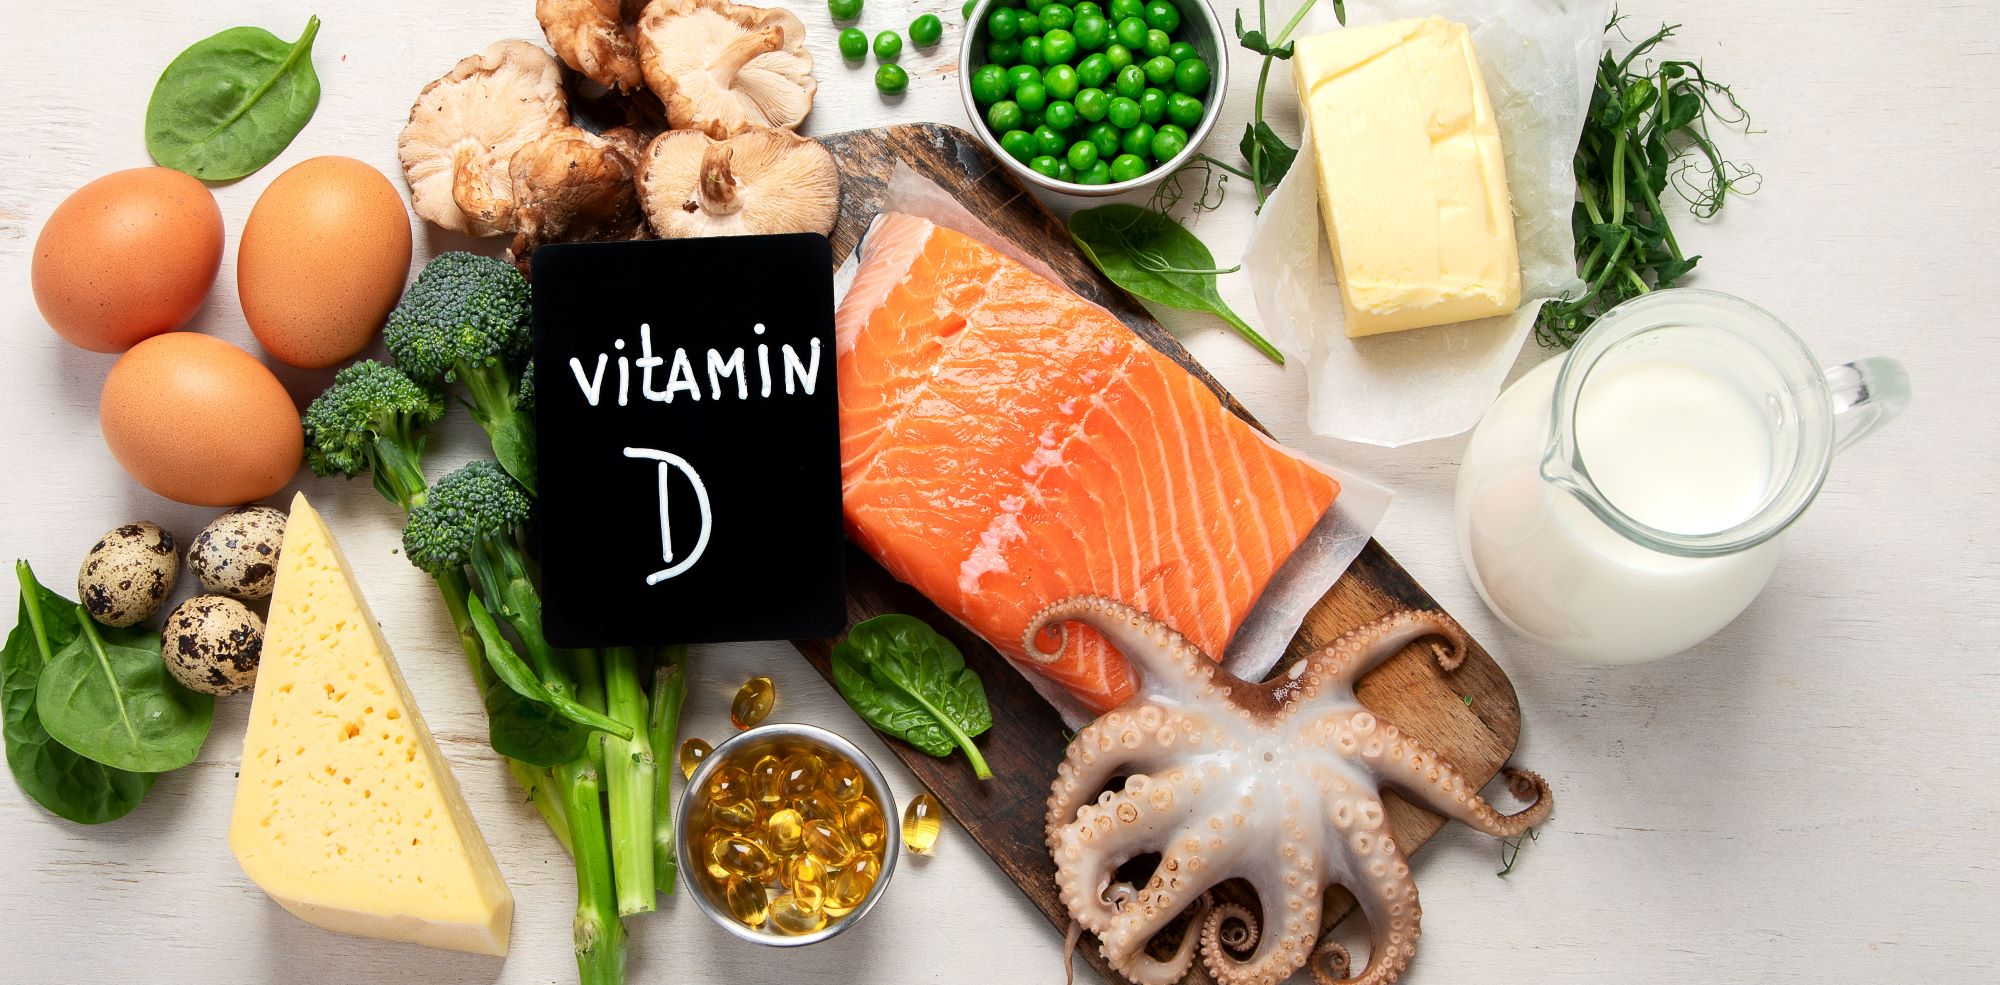 Could Vitamin D Be The Missing Anti-Aging Ingredient?